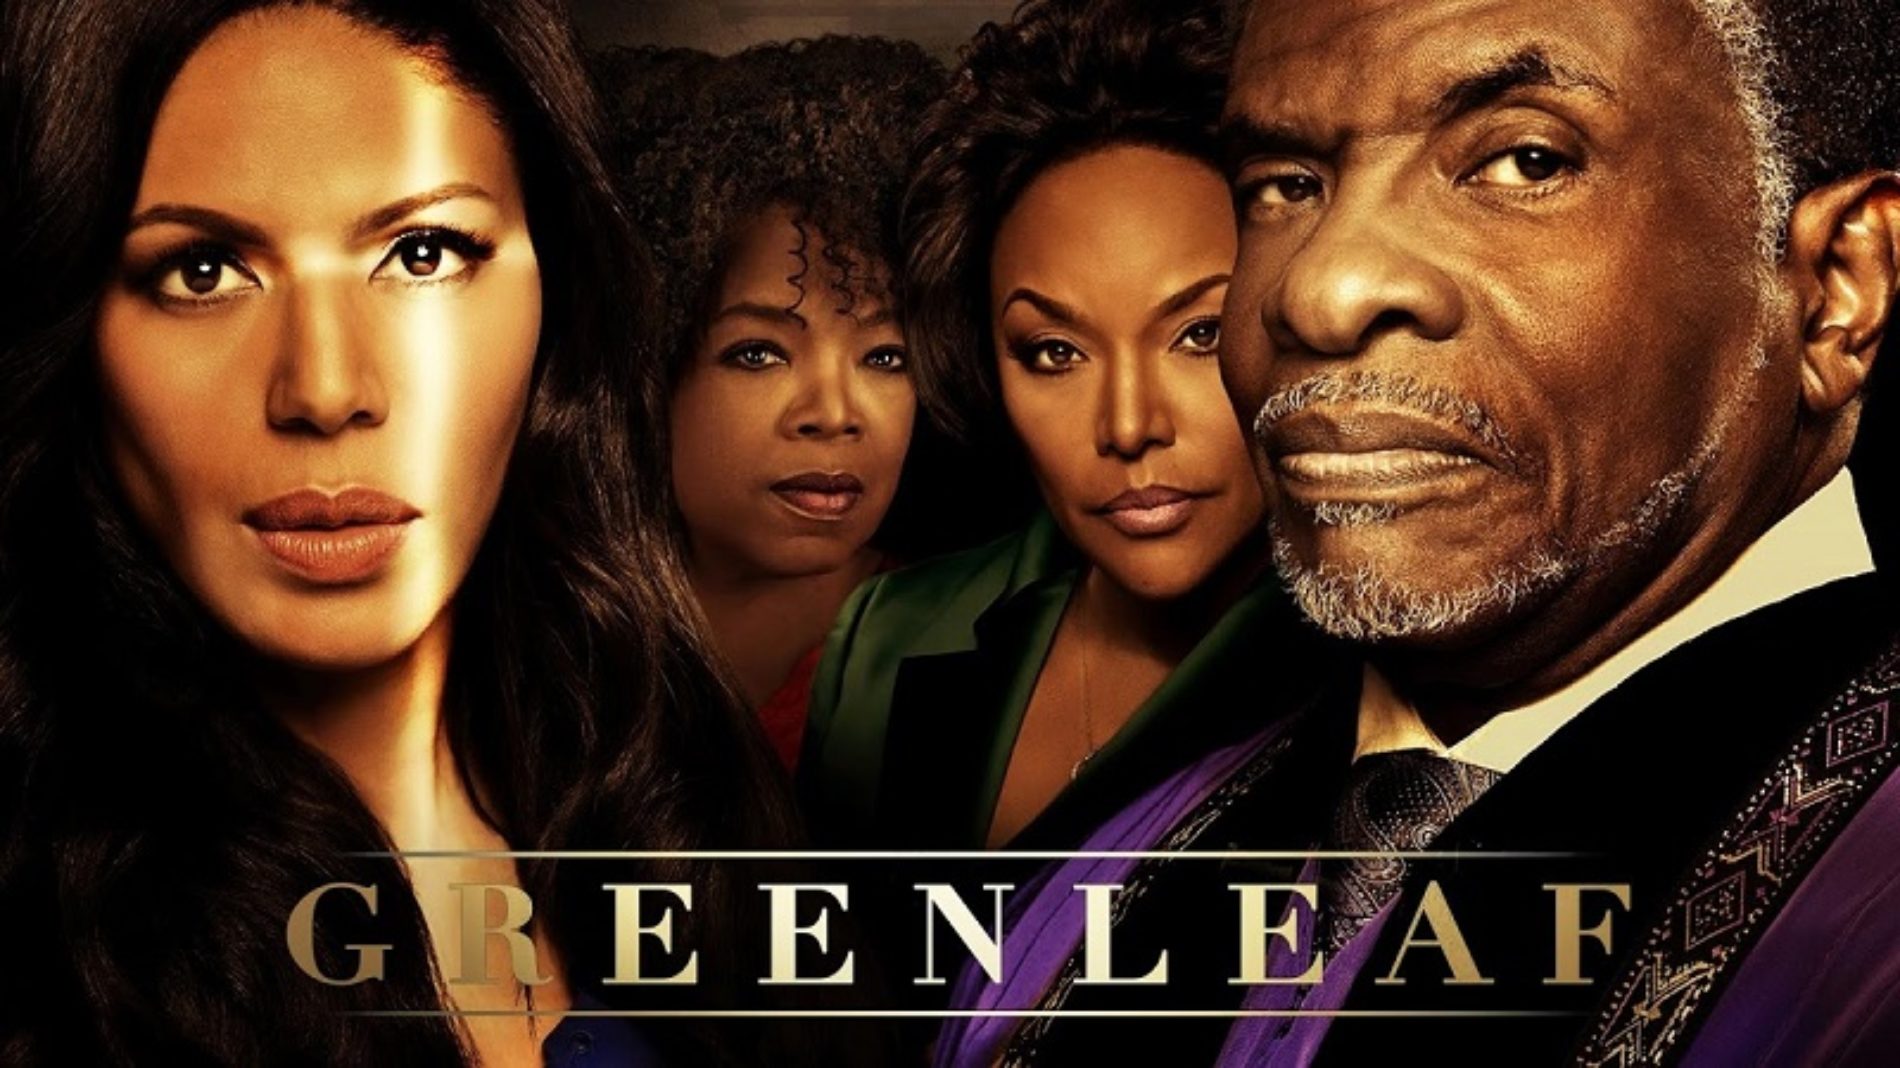 Greenleaf And Why The Church Has Lost Its Authority To Judge